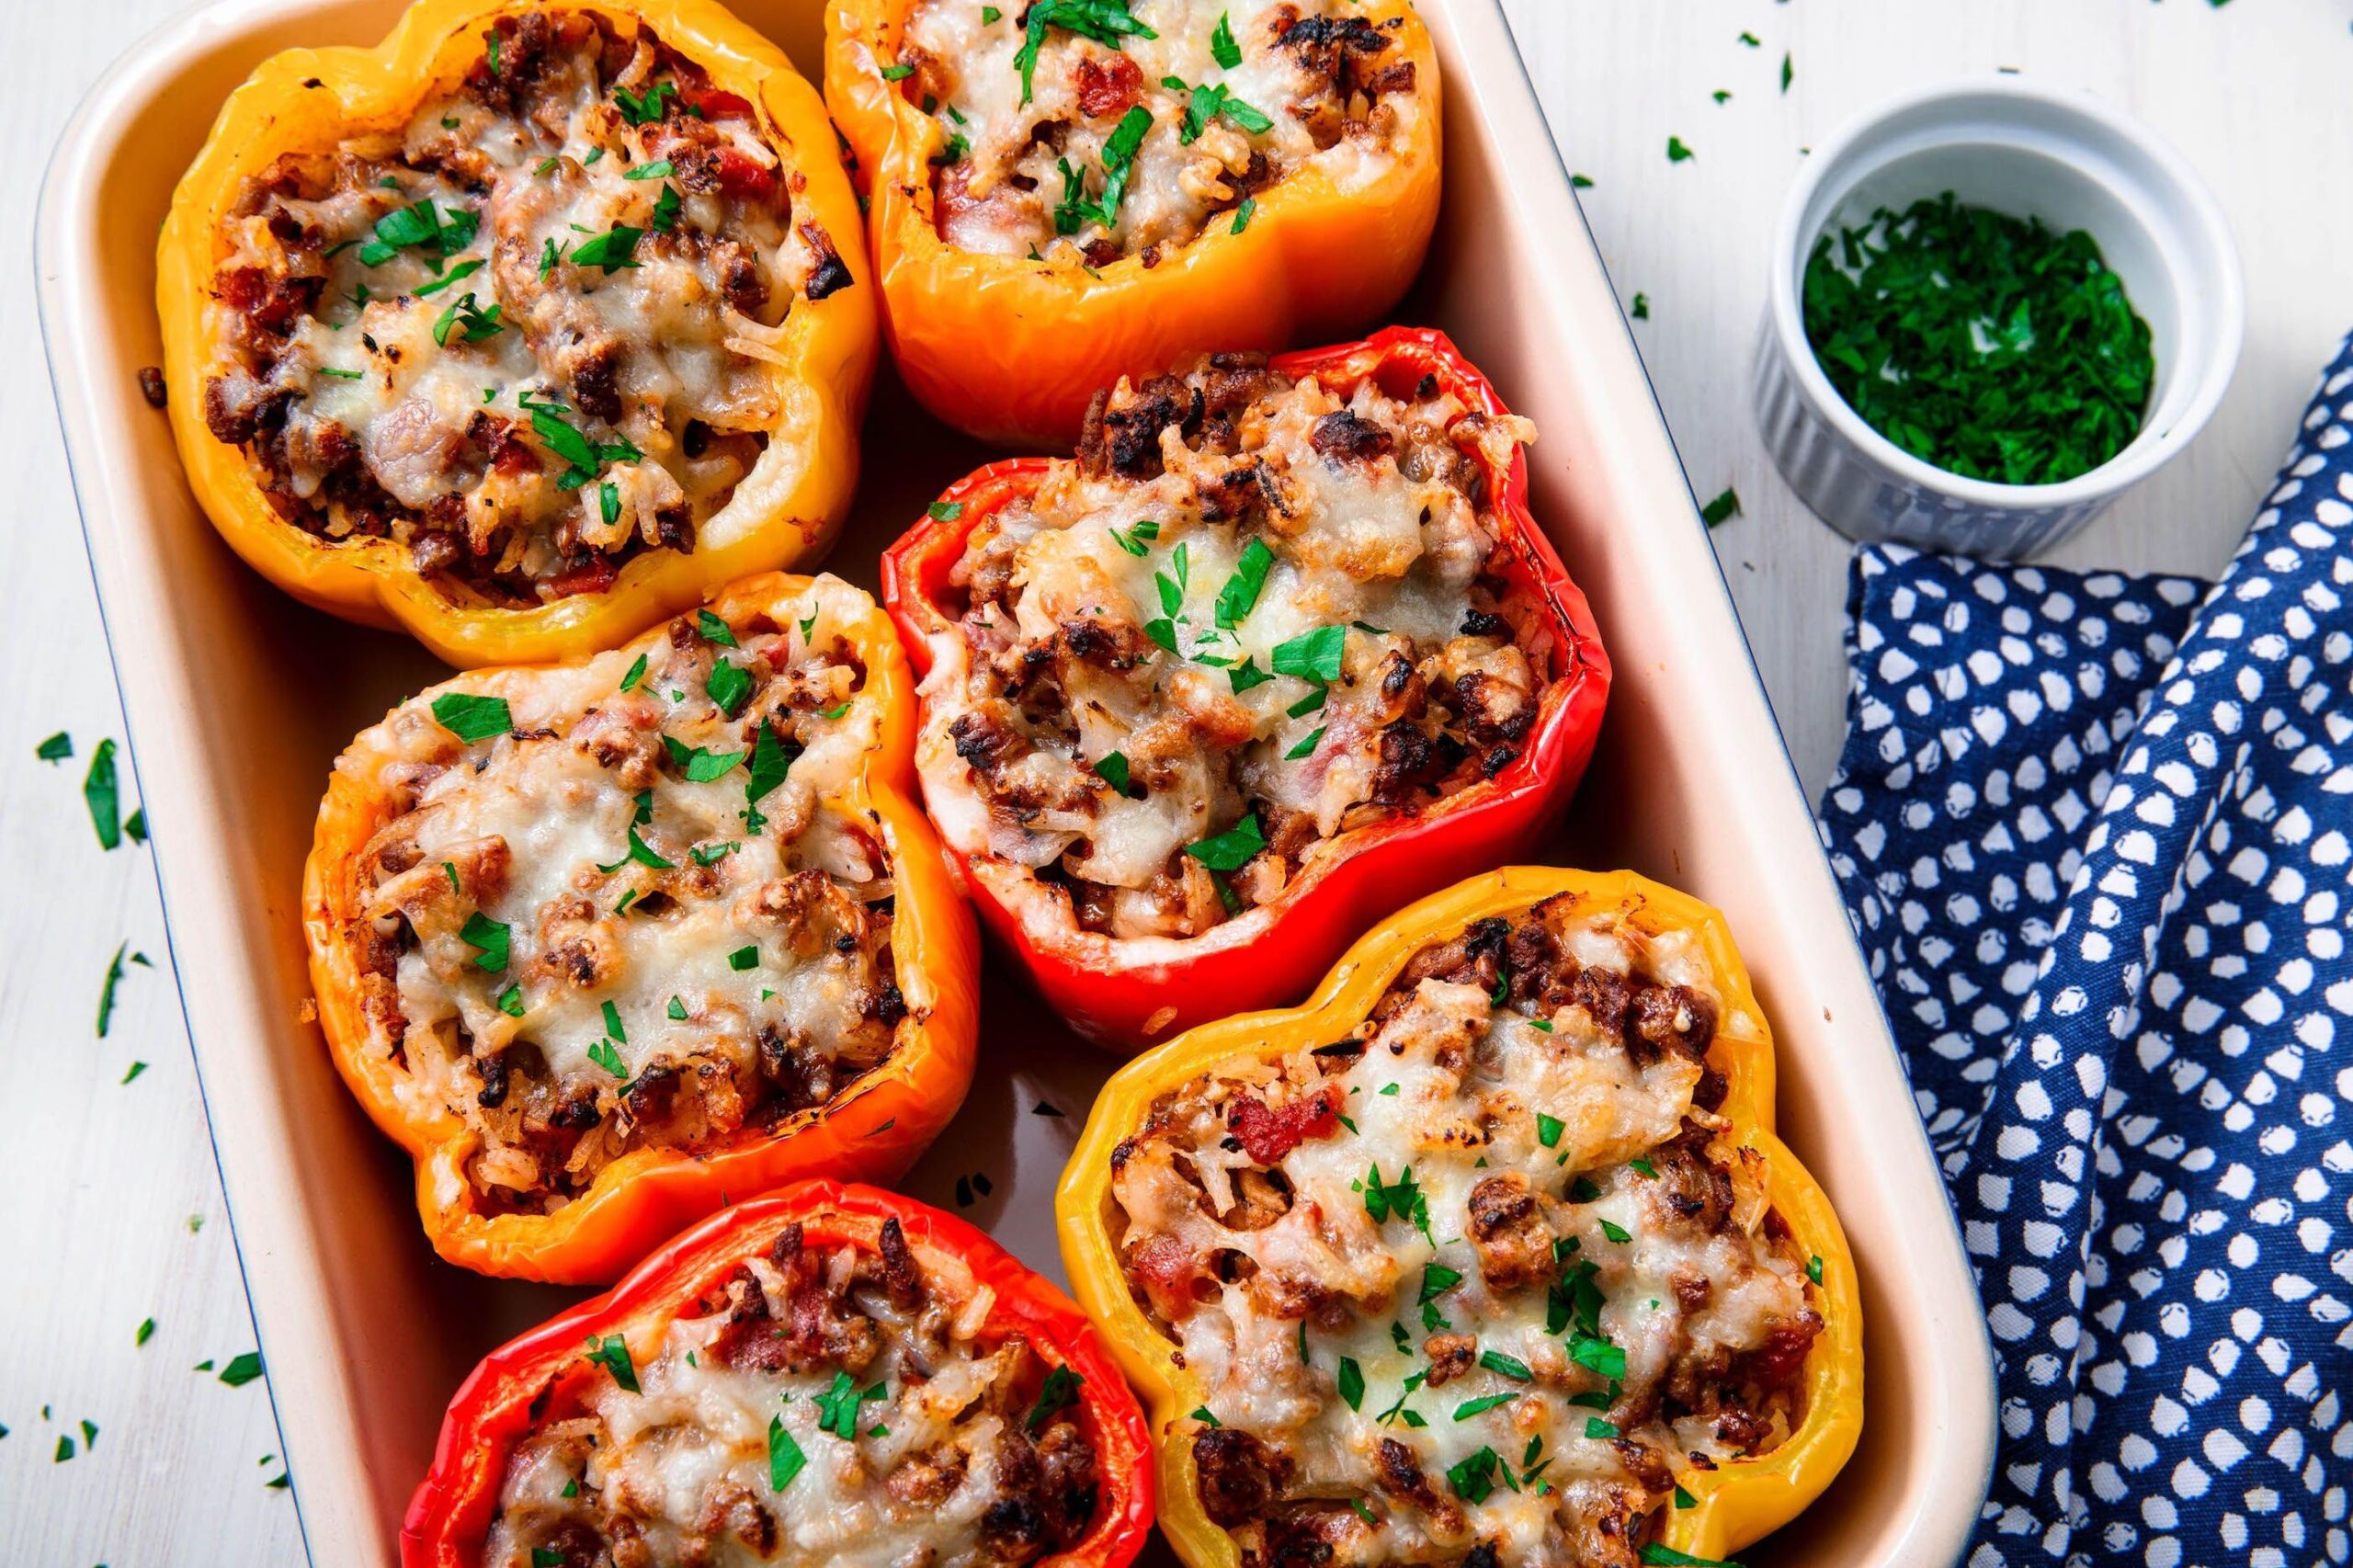  A rainbow of goodness: These baked capsicum bring color and nutrients to your plate.